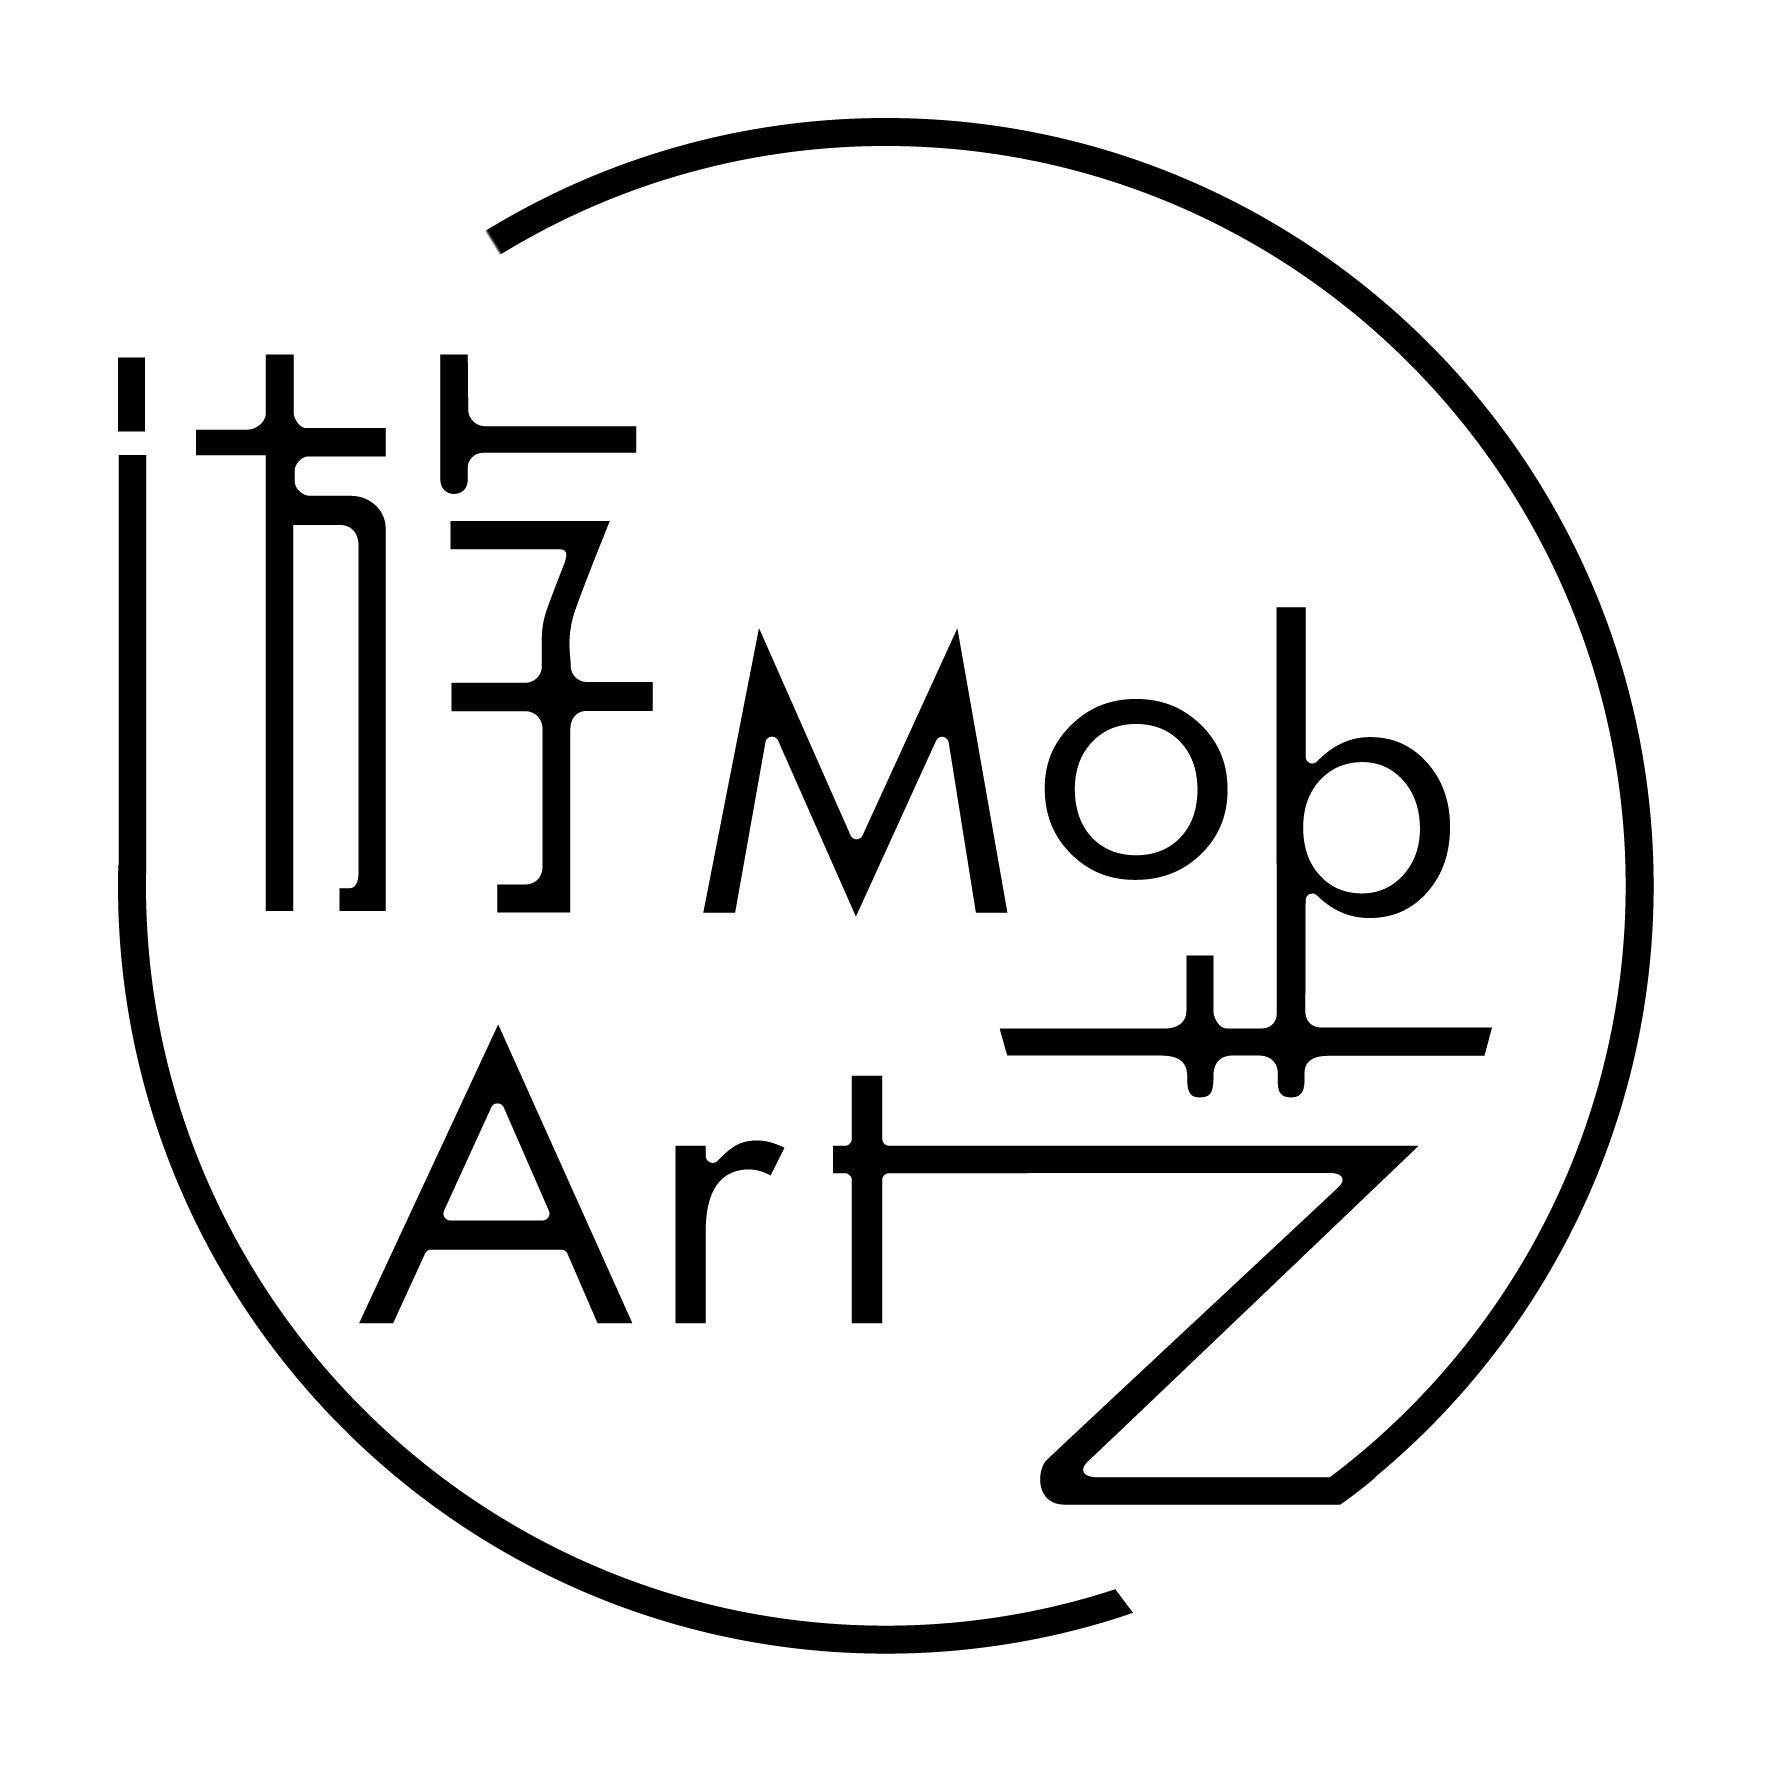 MobArt • 游藝
We work closely with artists to bring awesomeness to those who value and seek creativity.